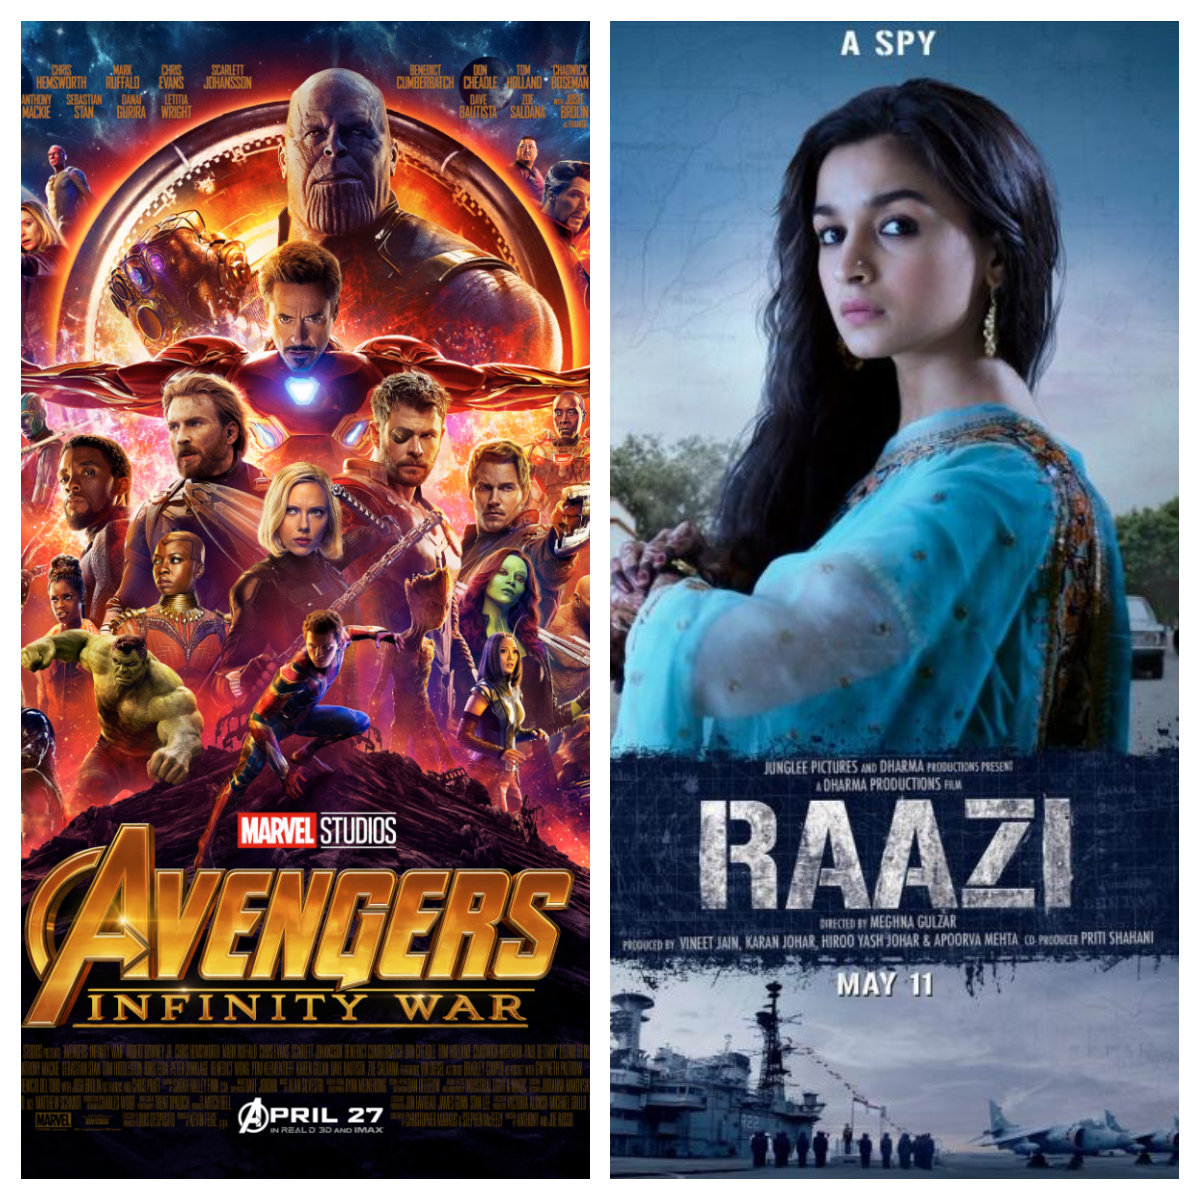 Box Office Report - Avengers: Infinity War and Raazi prove fruitful for a successful 2018 